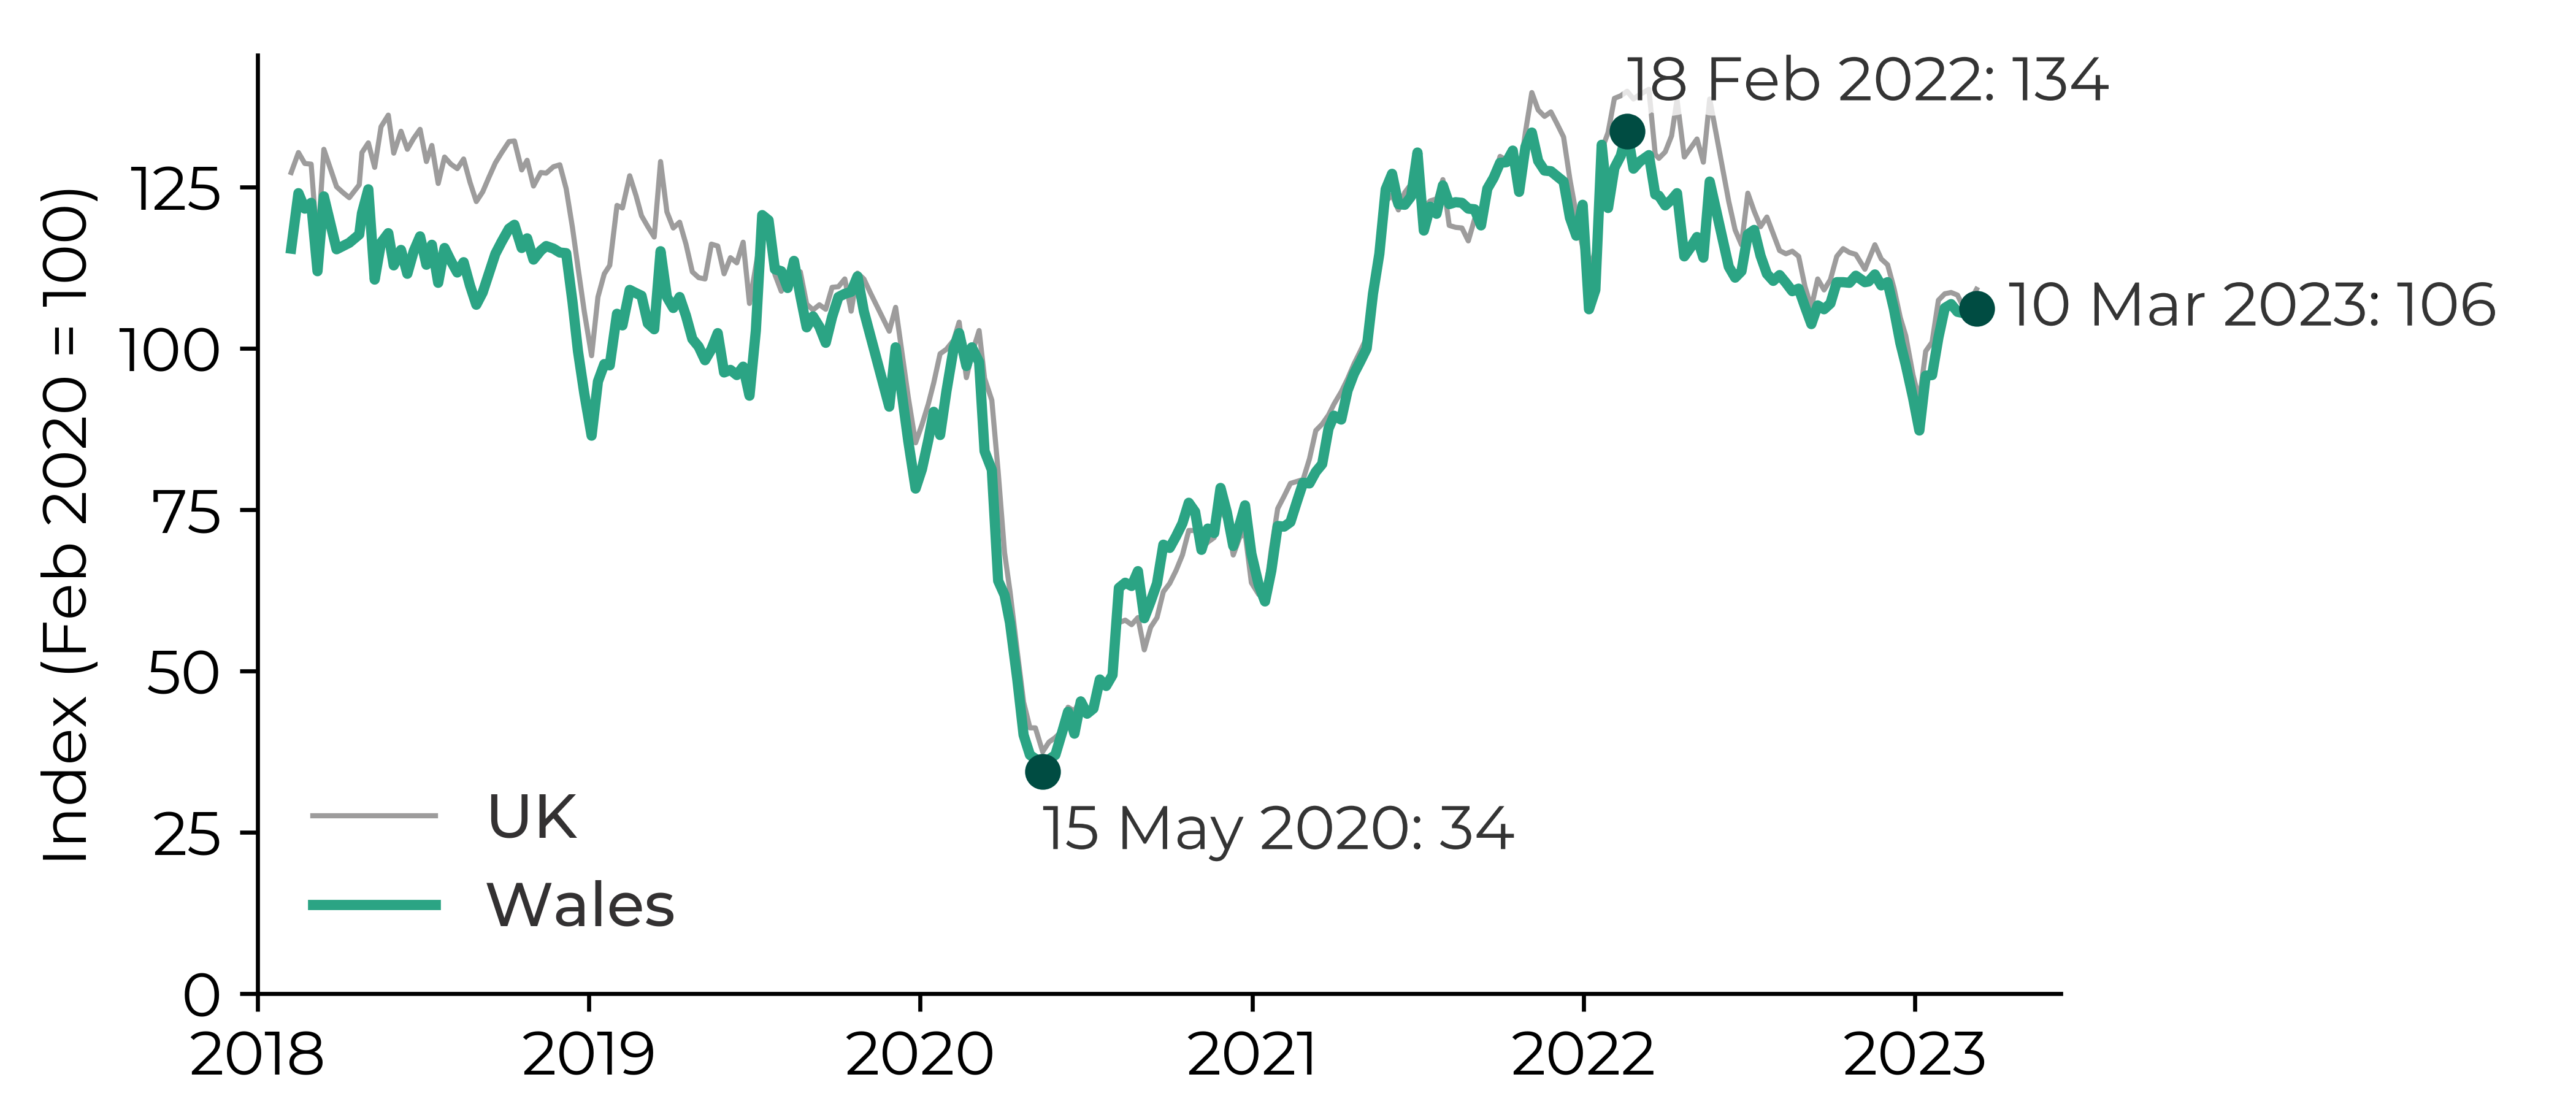 Graph showing that the index decreased from 100 in February 2020 to 34 in May 2020. The index increased to 134 by February 2022 and decreased to 106 by March 2023.